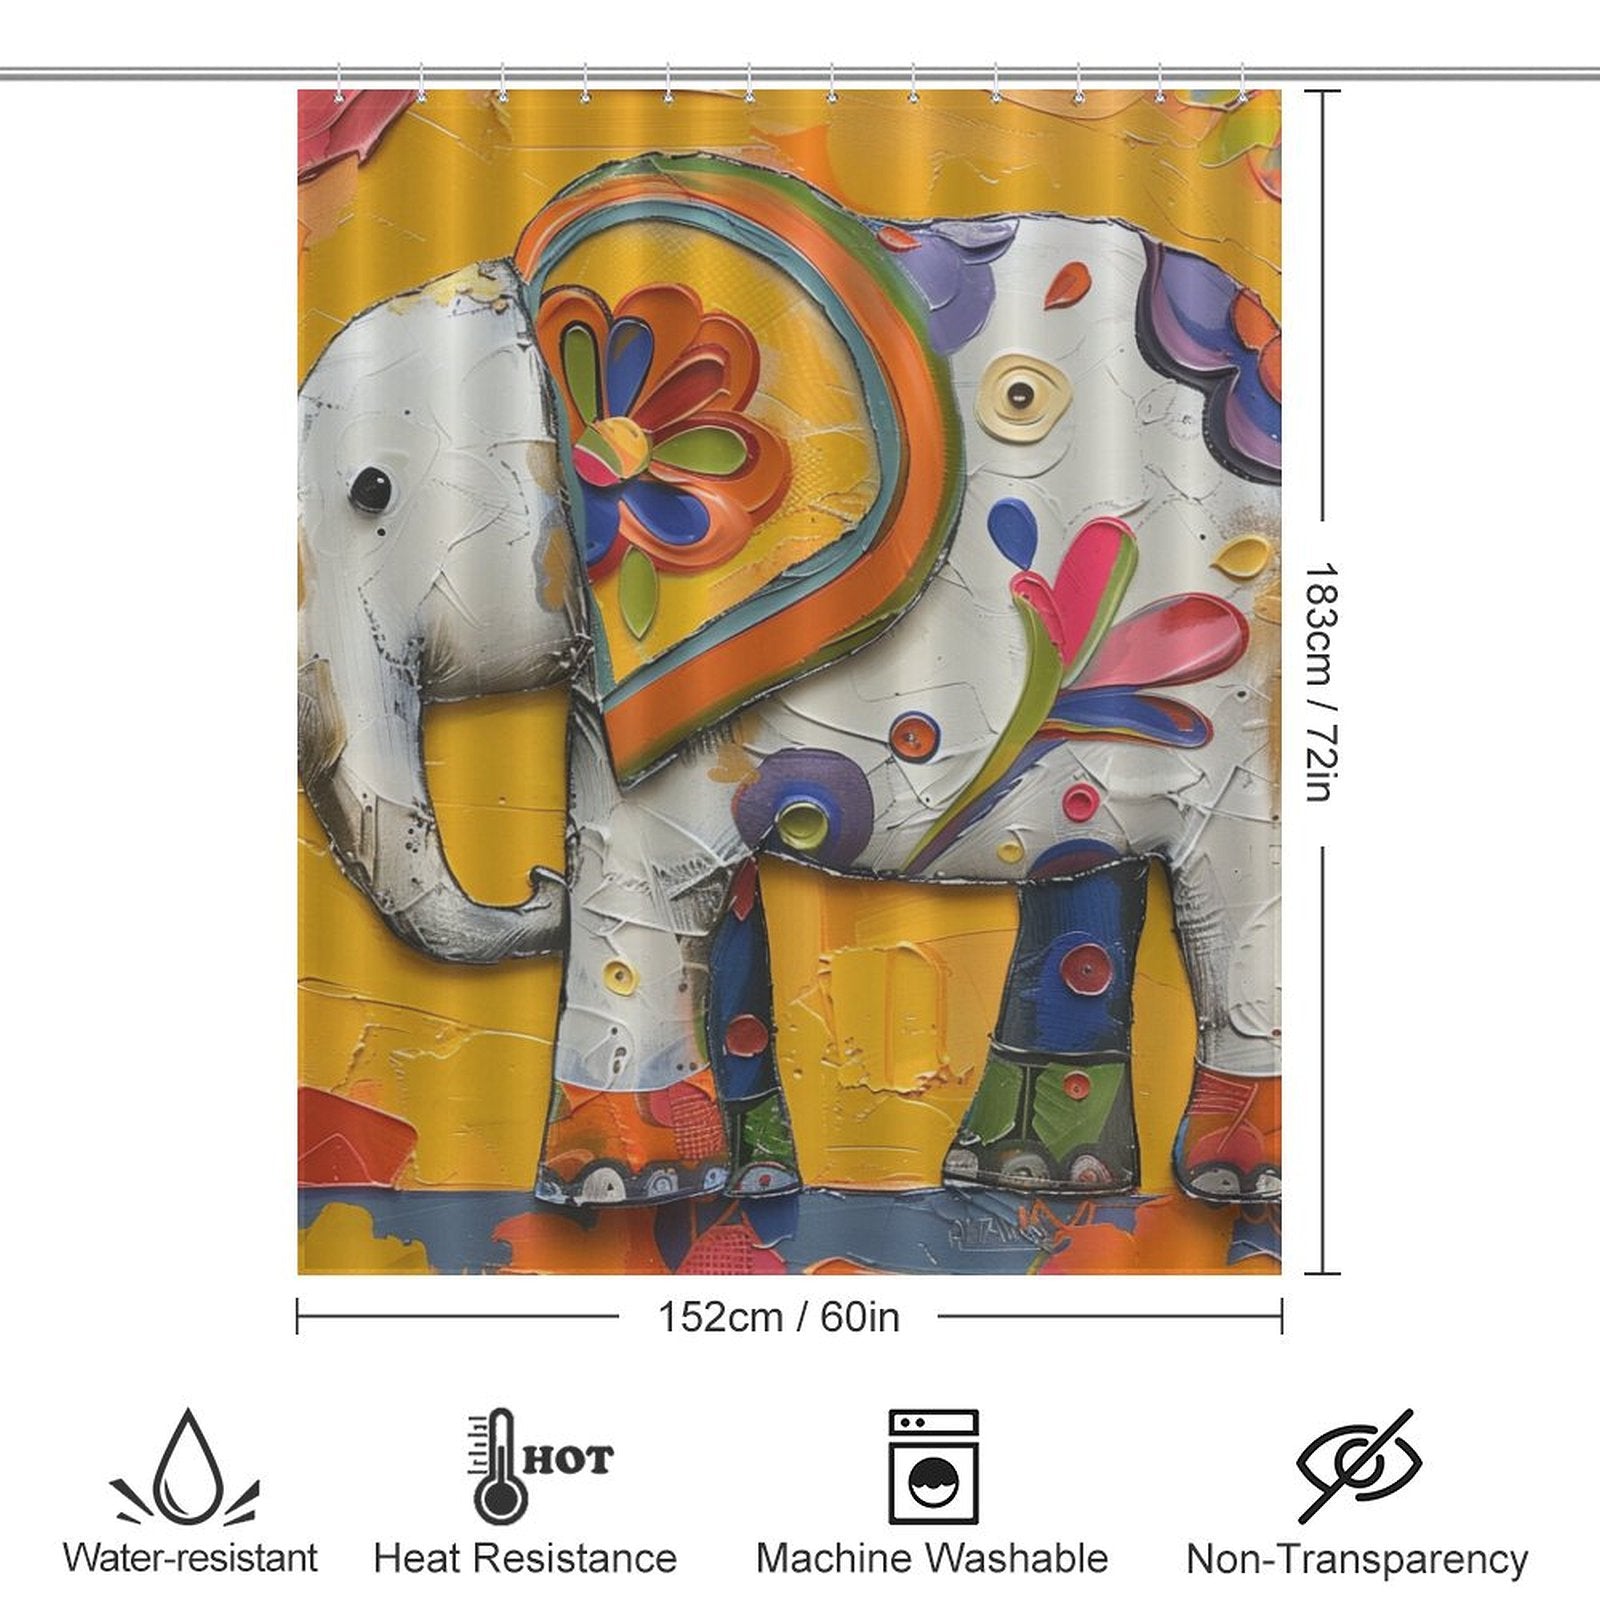 A Cute Baby Elephant Shower Curtain-Cottoncat measuring 183cm by 152cm from Cotton Cat is displayed. Icons below indicate it is water-resistant, heat-resistant, machine washable, and non-transparent. Perfect for adding a charming touch to your bathroom decor with its adorable baby elephant design.
